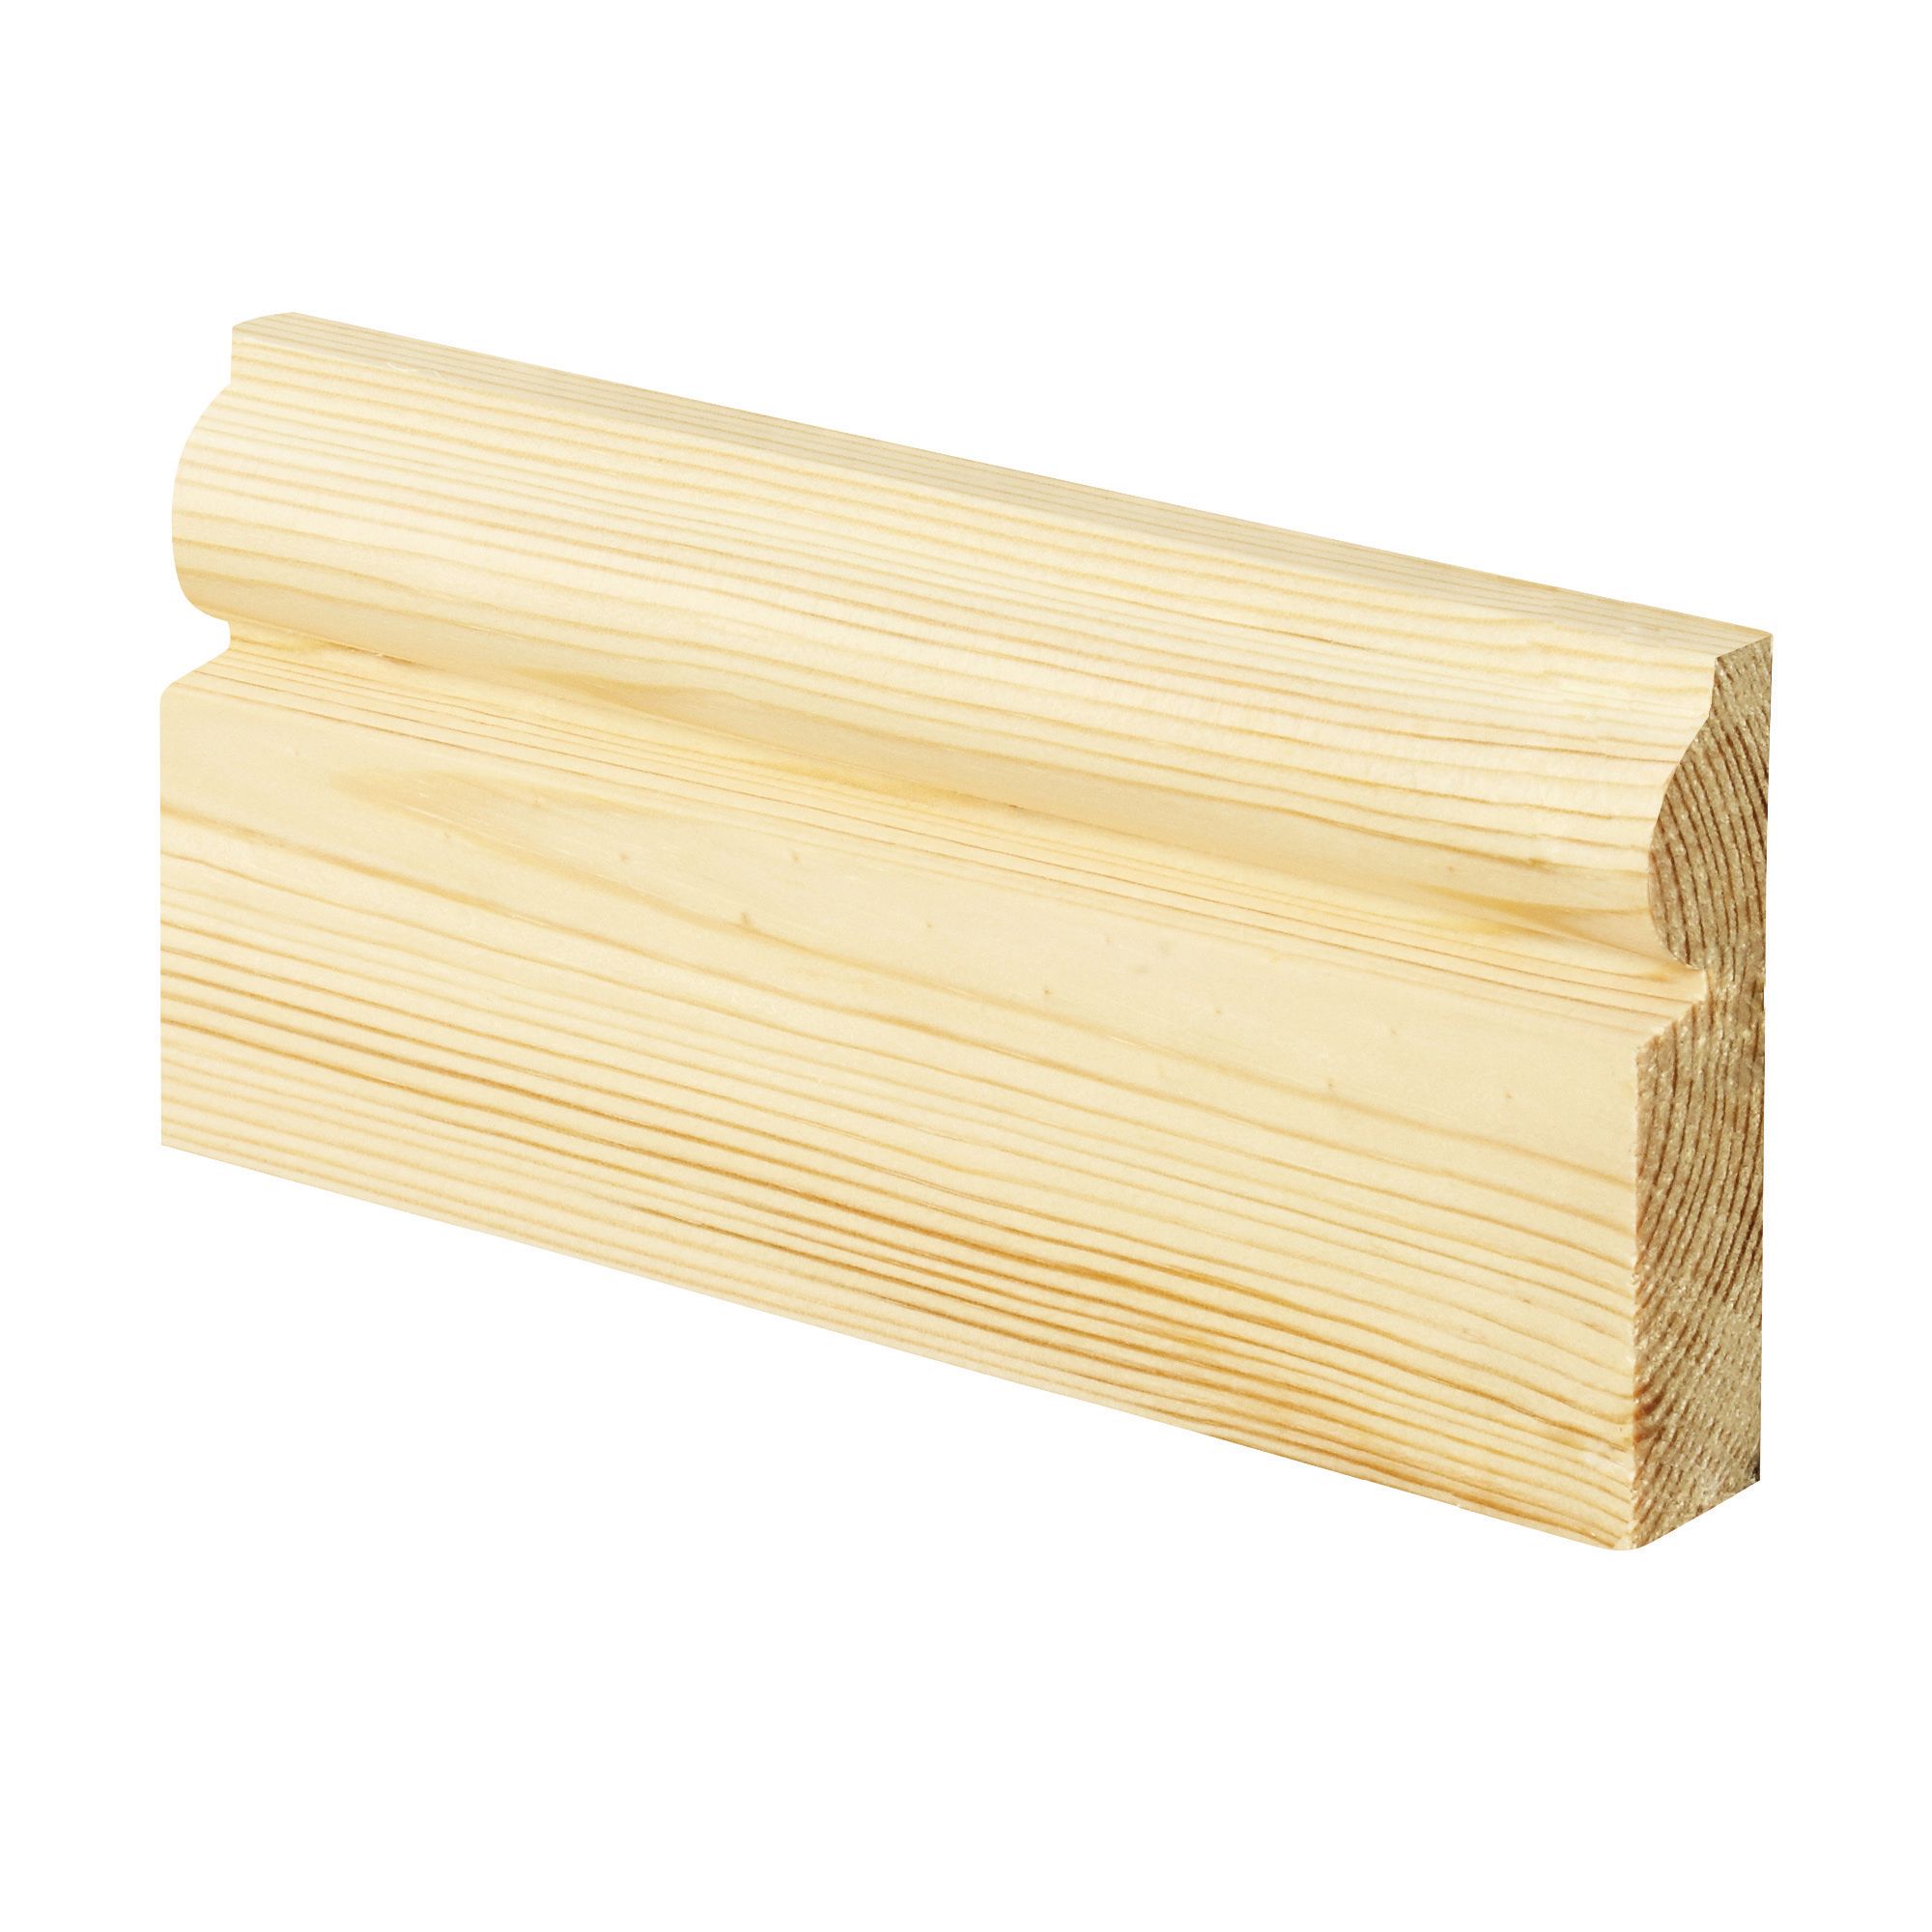 Image of Wickes Torus Pine Architrave - 19mm x 69mm x 2.1m Pack of 5